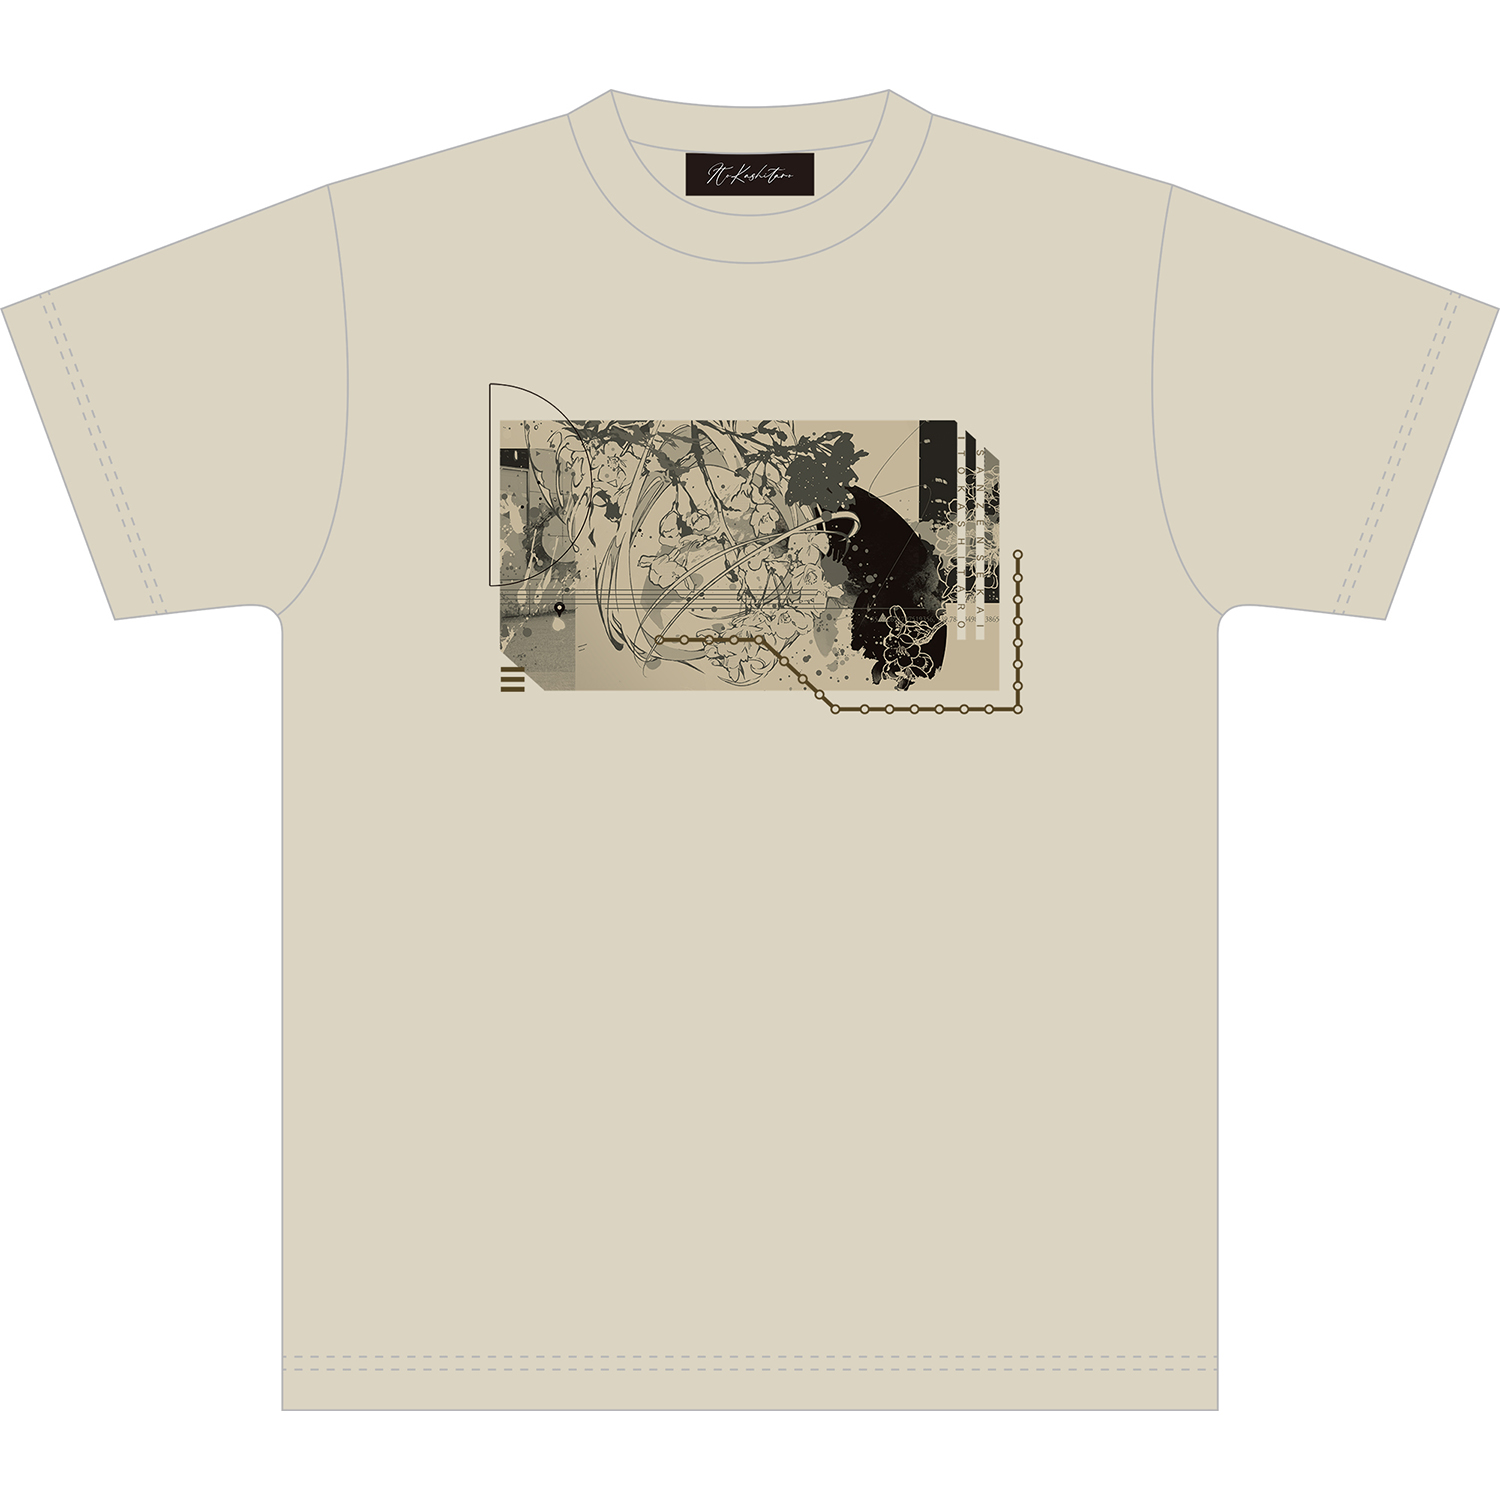 GOODS - 伊東歌詞太郎 Official Web Site